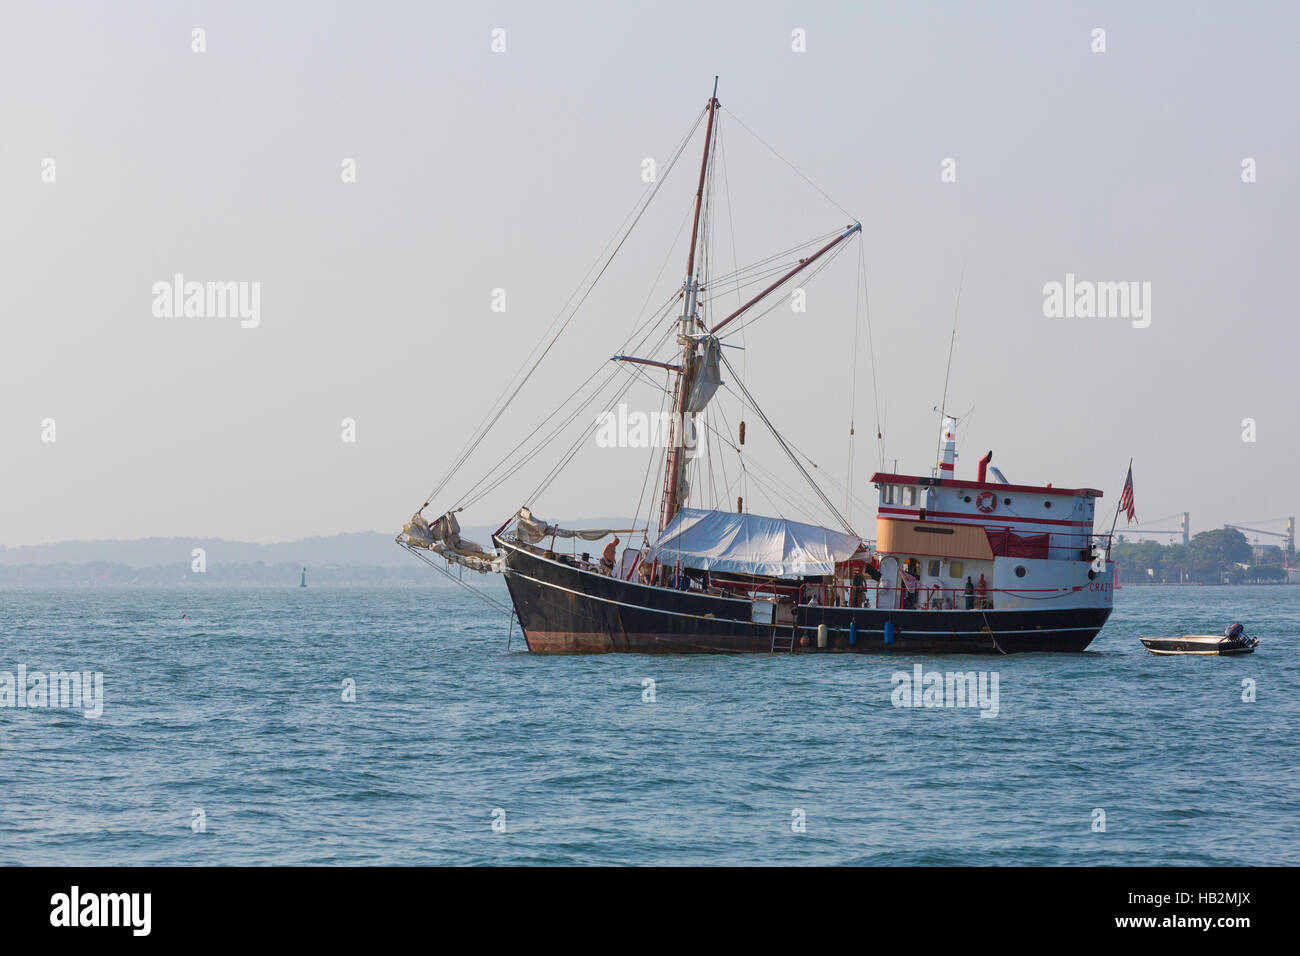 CARTAGENA, COLOMBIA, JANUARY 8: Big passenger sailboat anchored in the bay of Cartagena with clear sky and tourists on board. Colombia 2015 Stock Photo